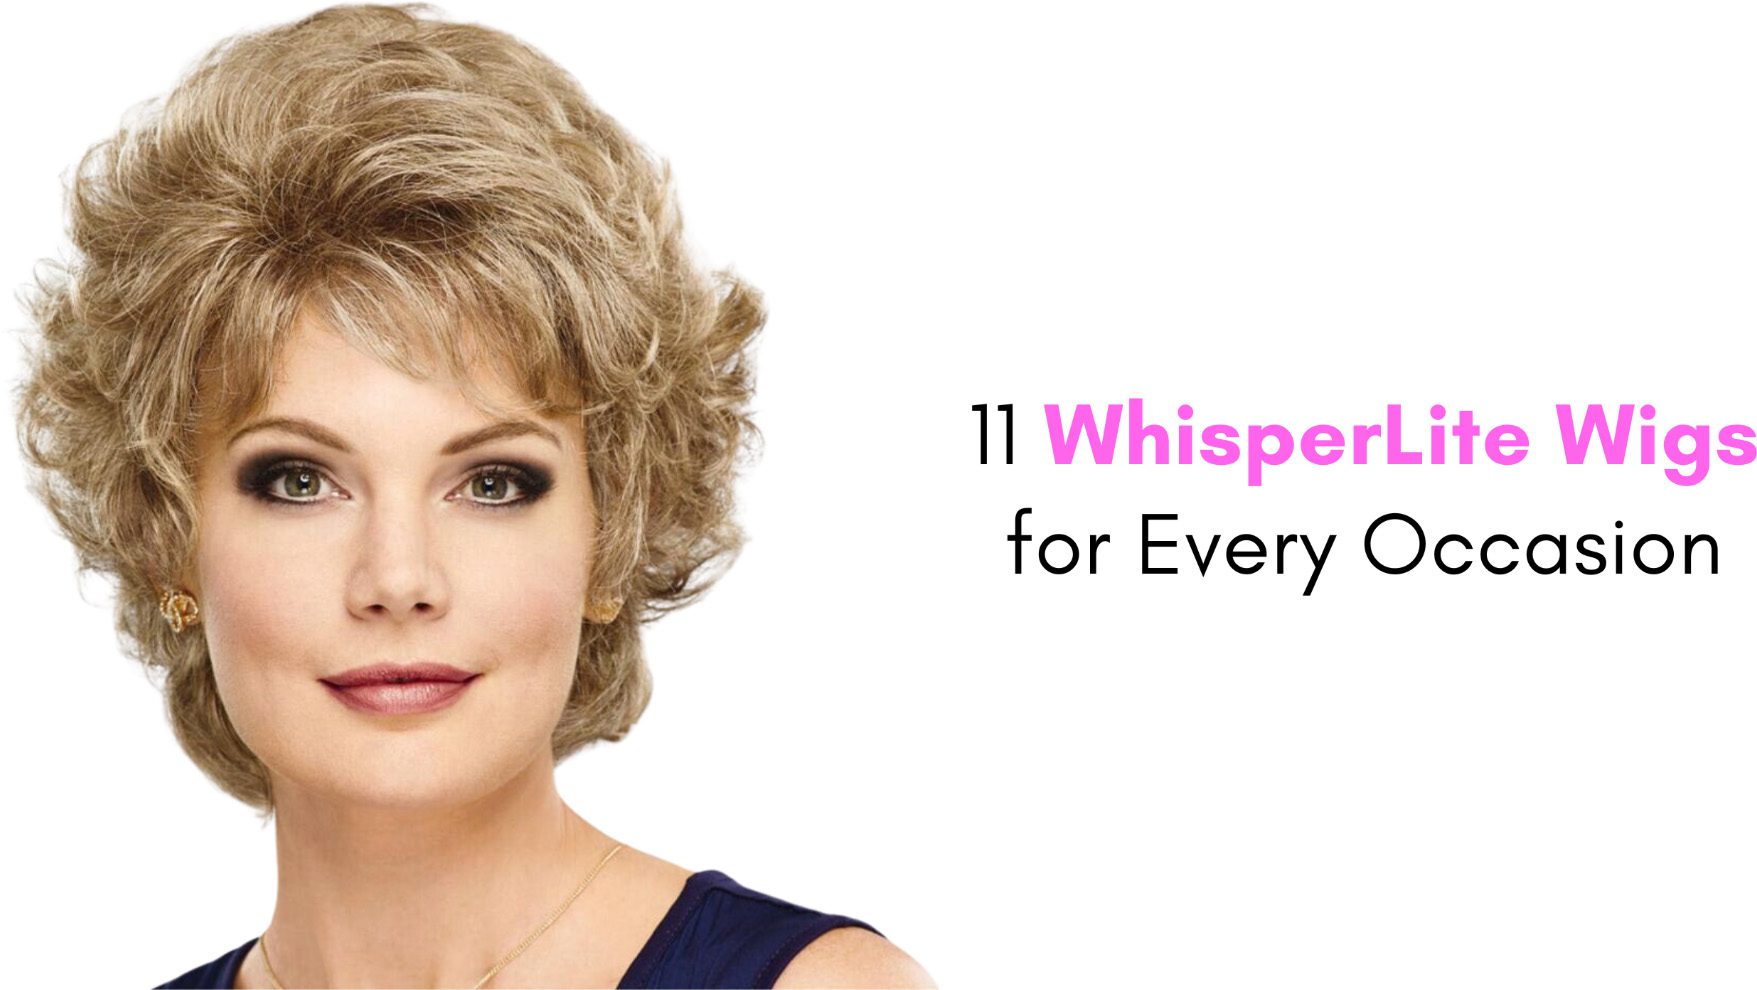 11 WhisperLite Wigs for Every Occasion